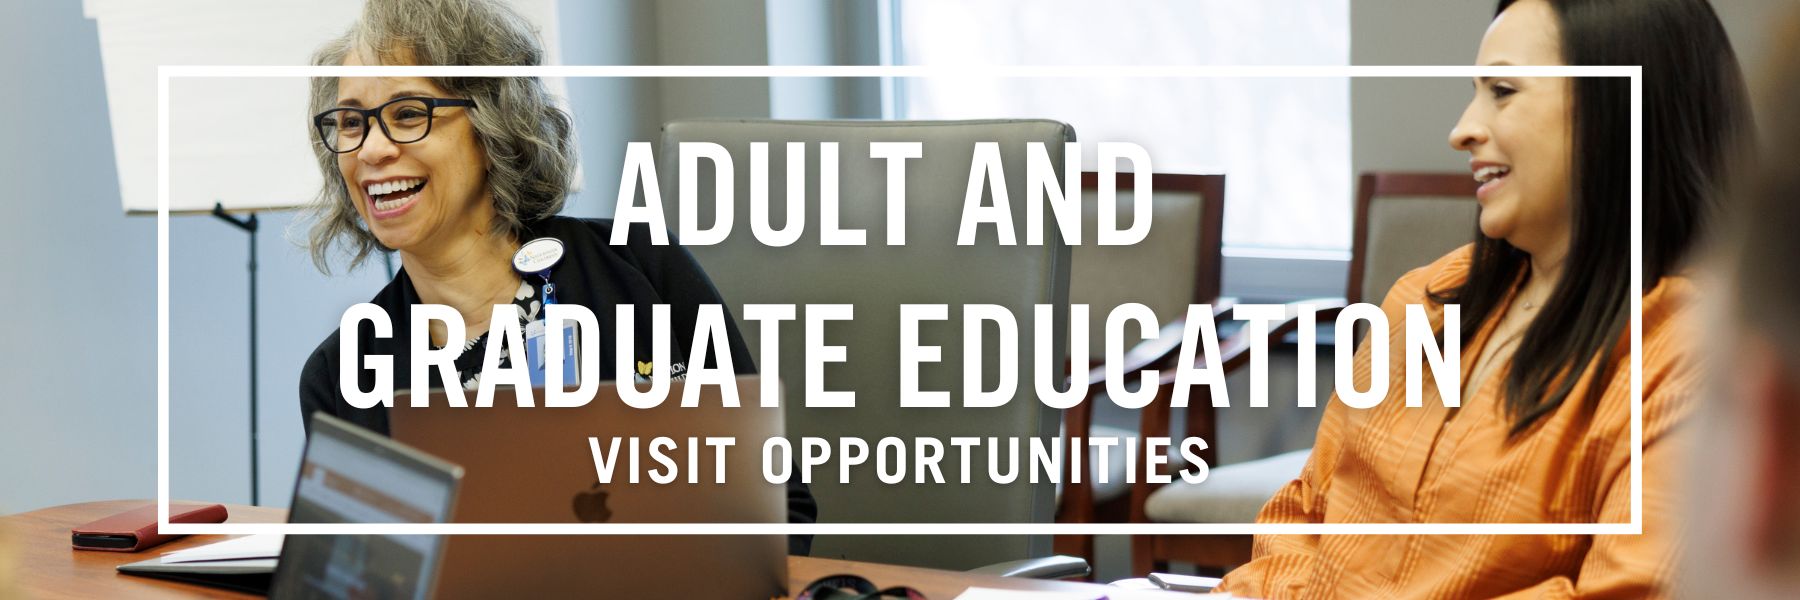 Graduate and Continuing Education Visit Opportunities